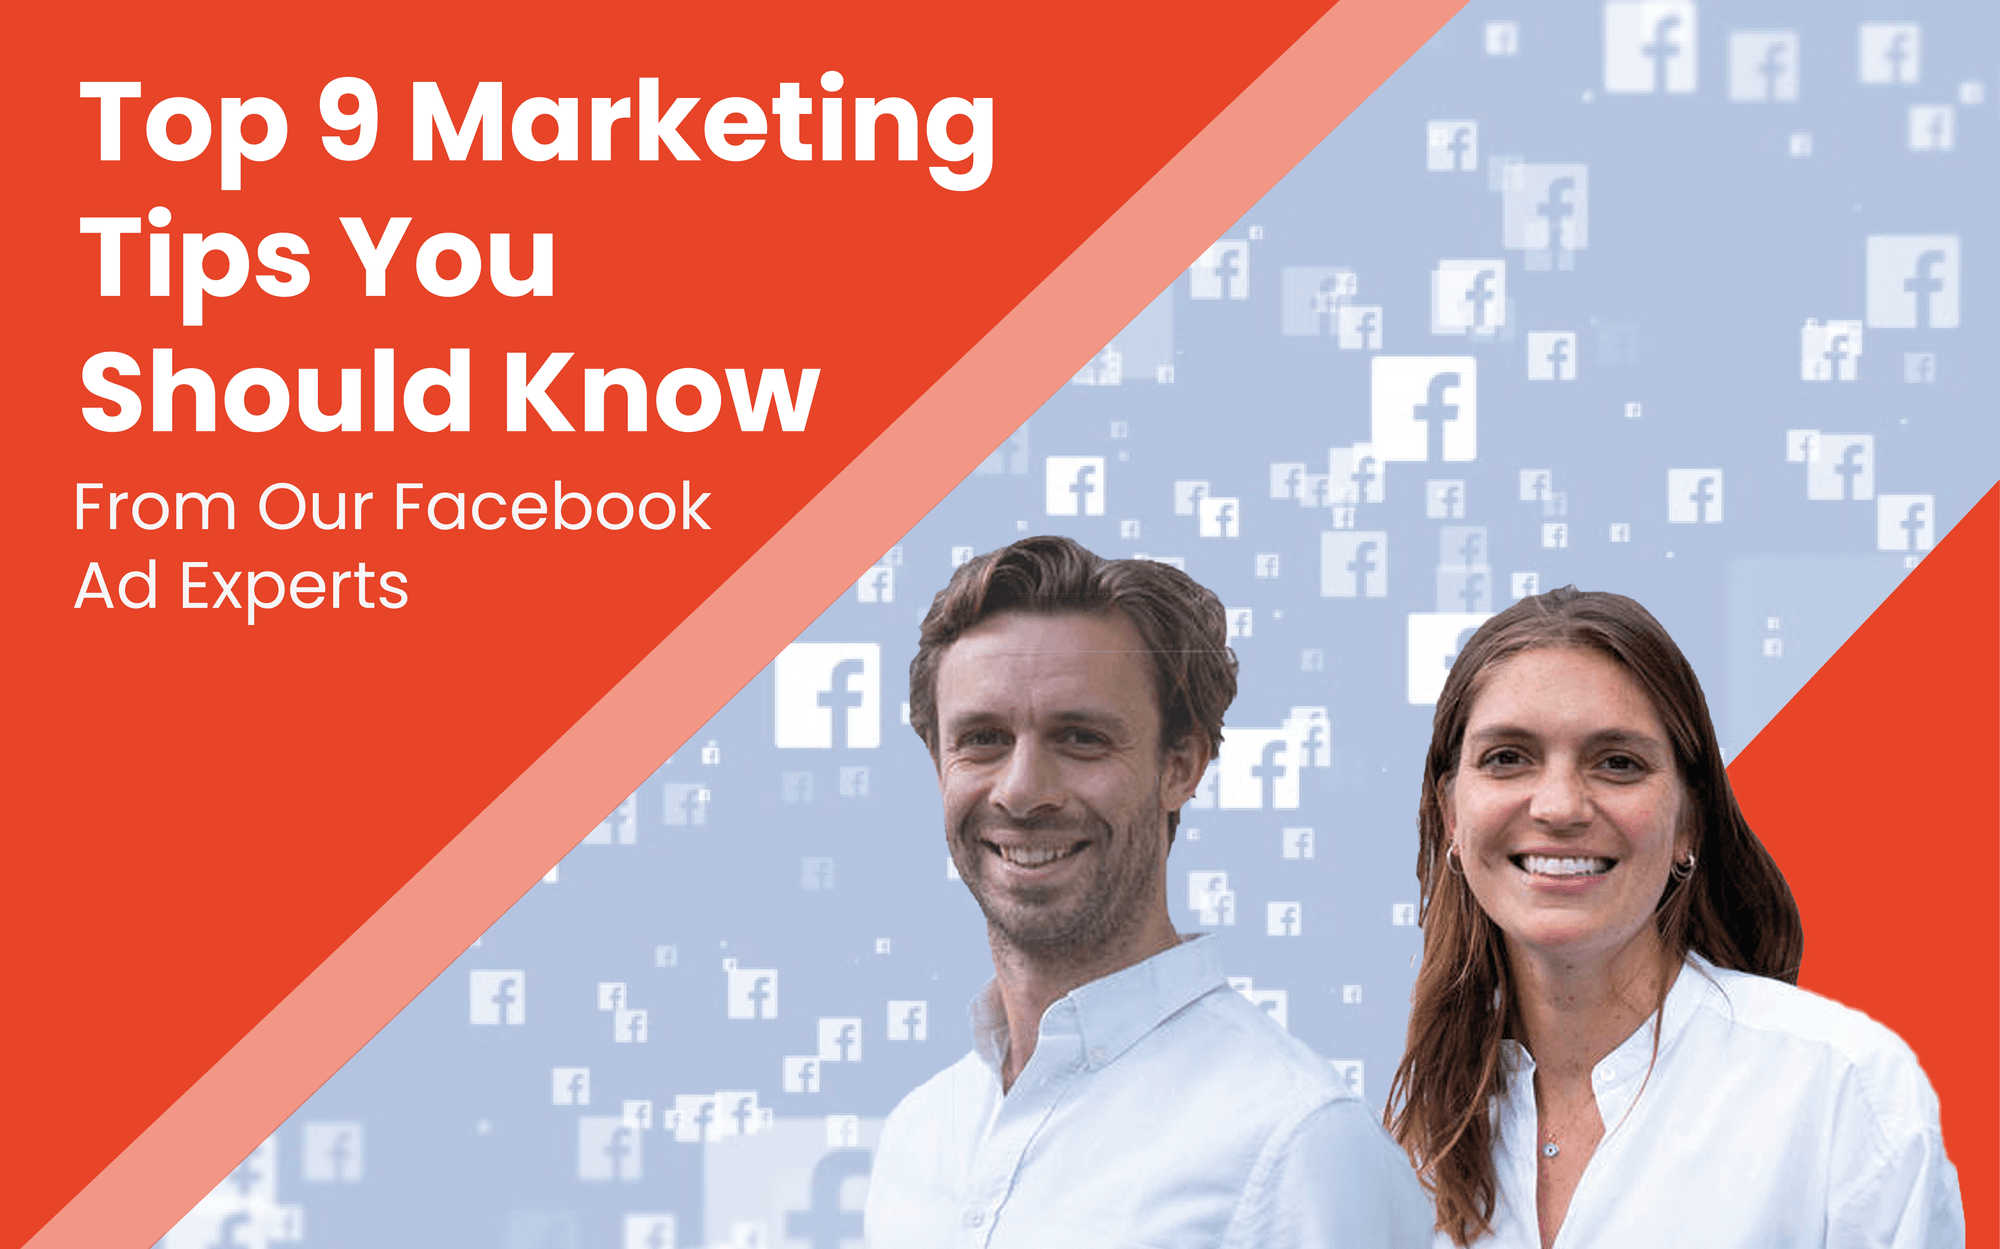 Facebook Marketing: 6 Tips To Grow Your Business